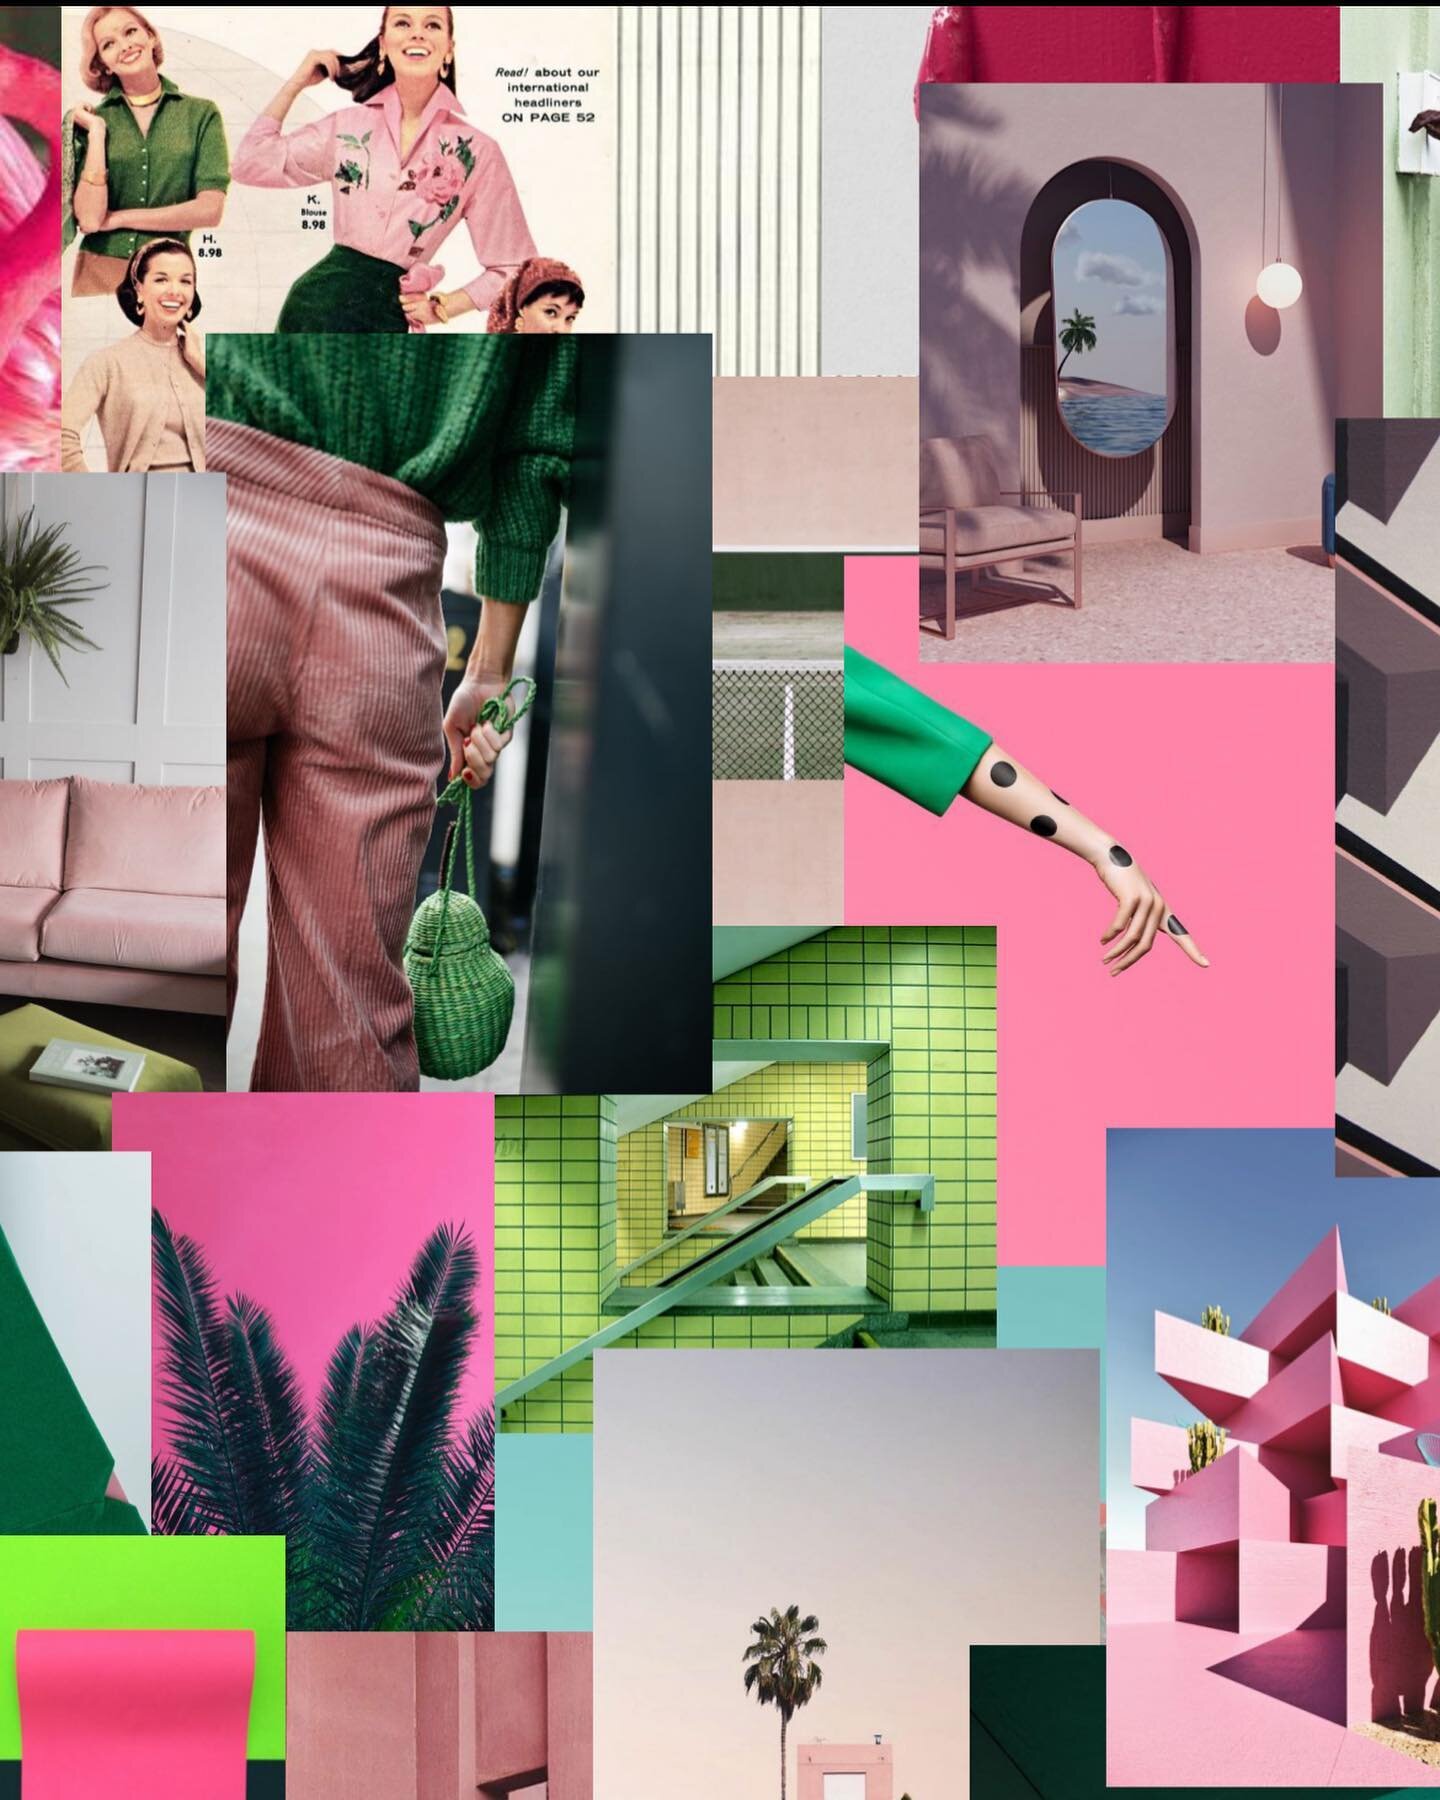 #VagabondARQ branding 🌸🌴🧠🧩
We focused on architectural forms in buildings, nature and fashion. Of course all in #pinkandgreen